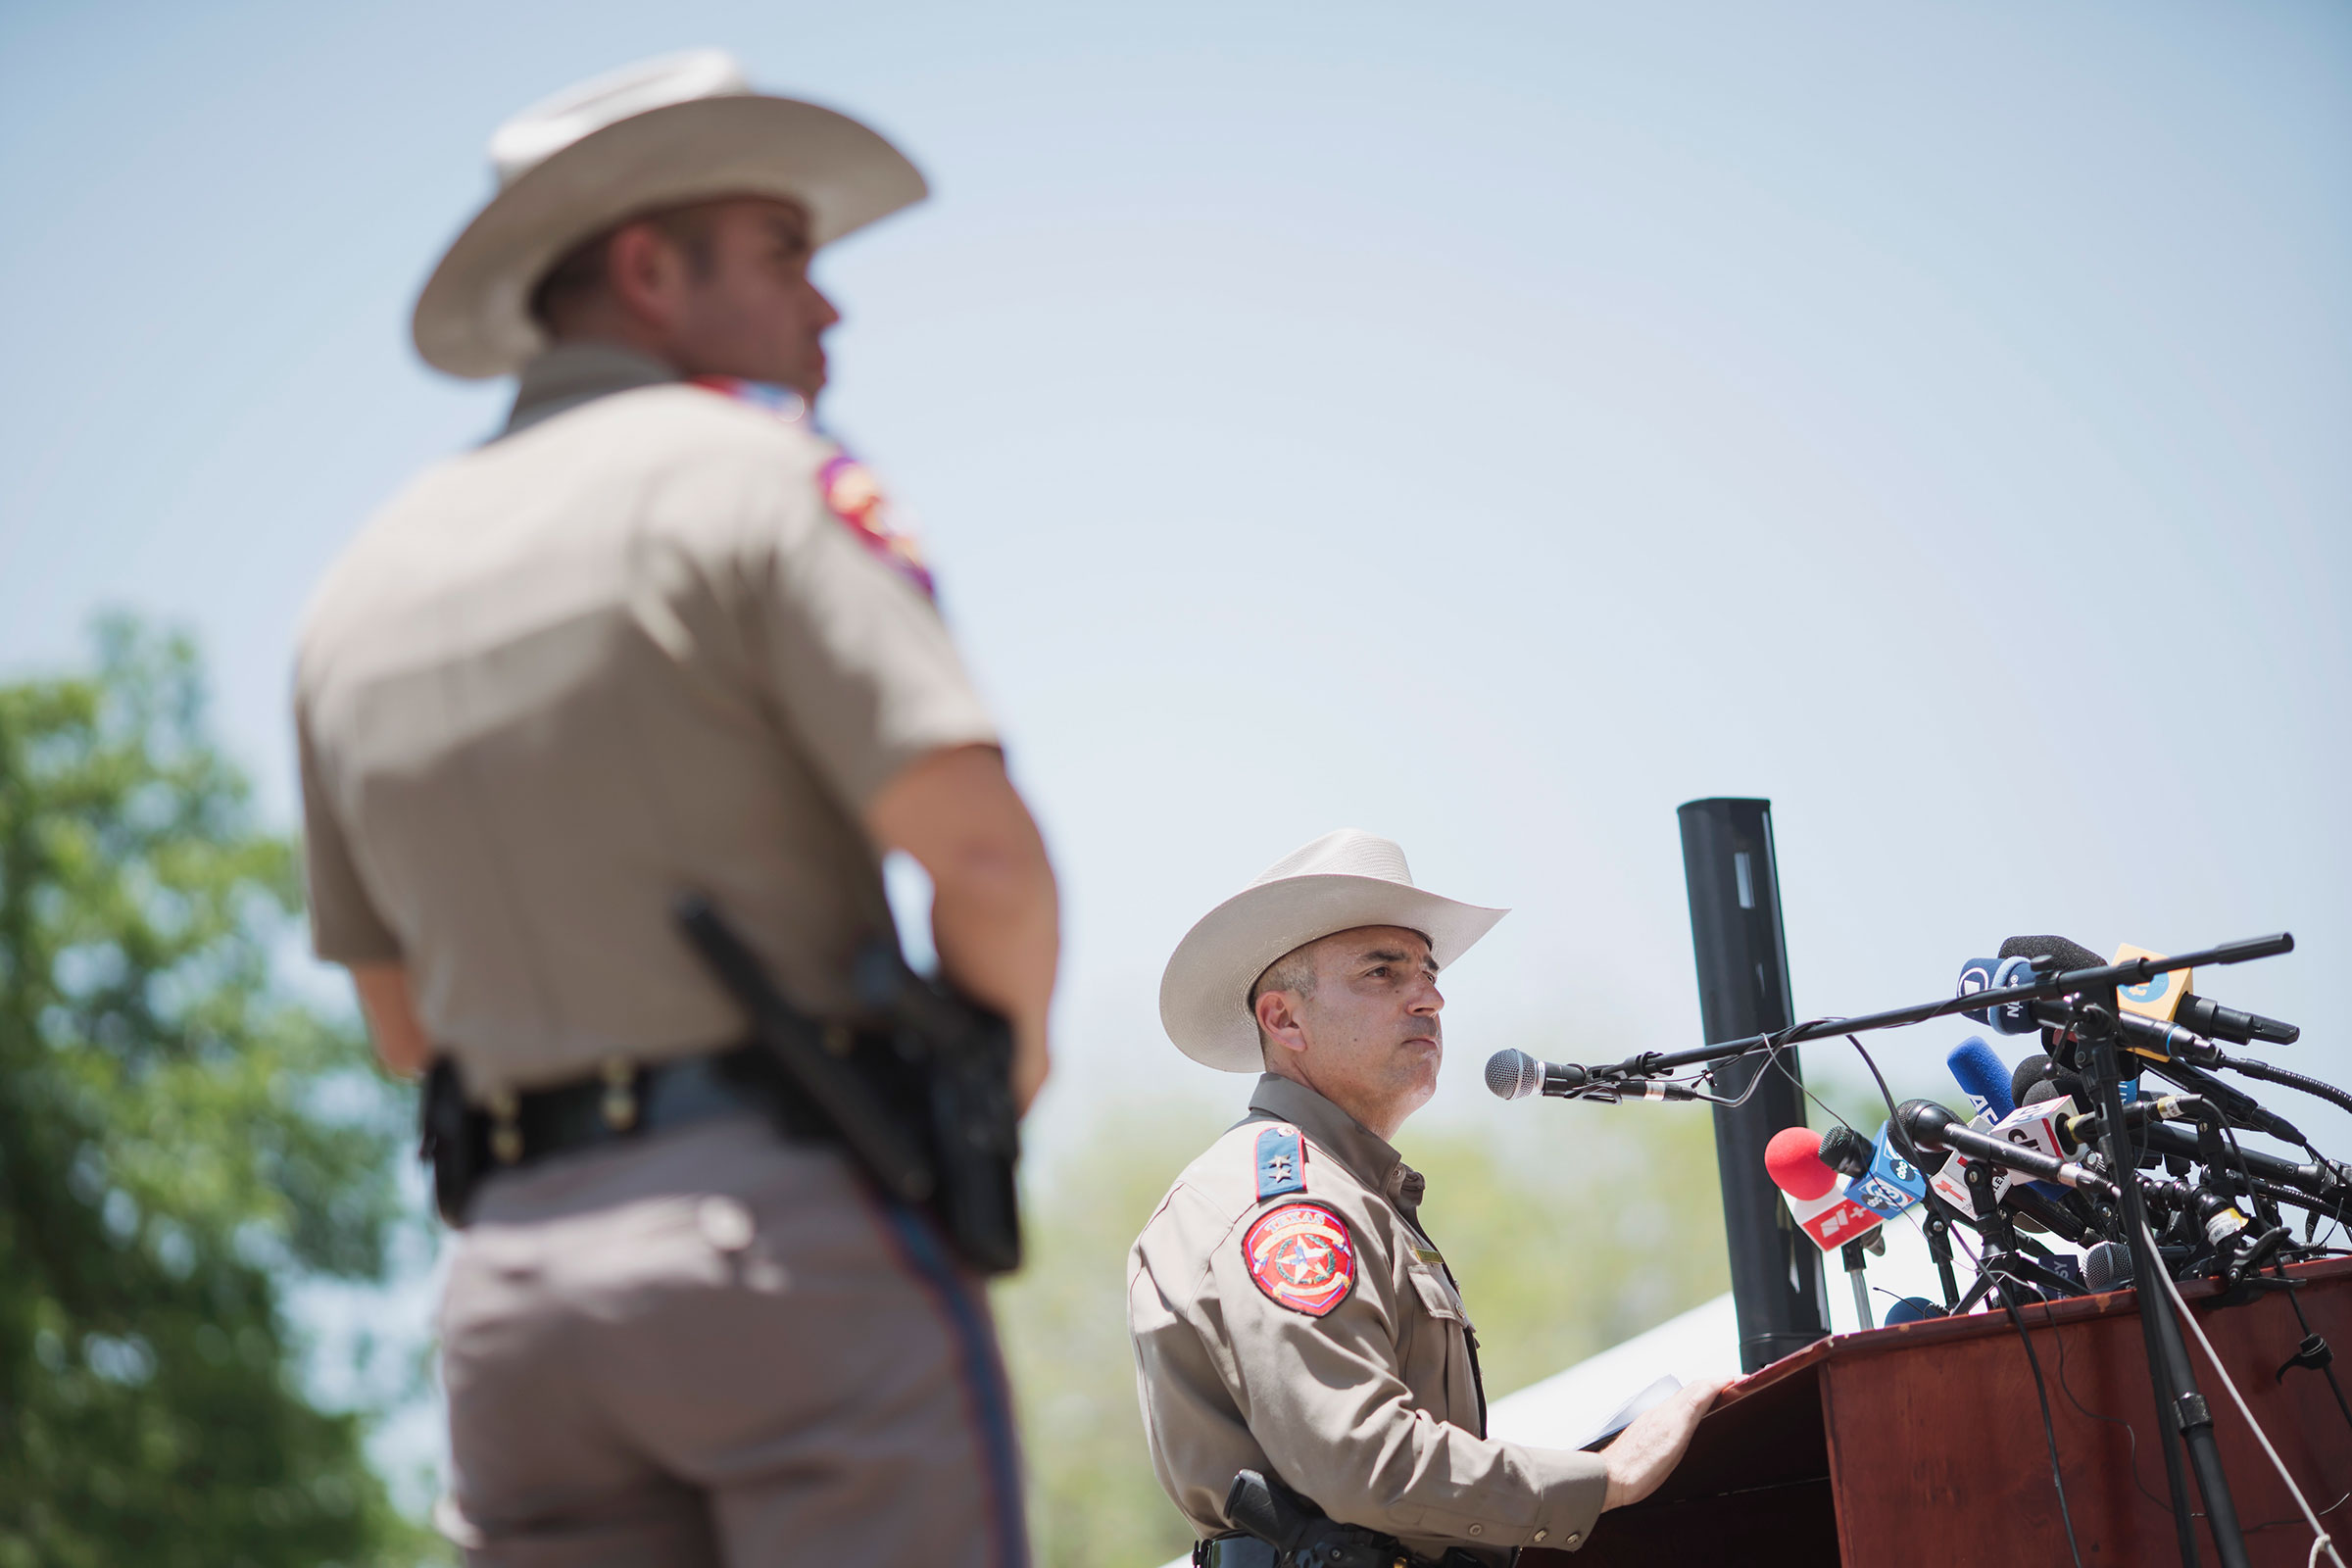 Victor Escalon, Regional Director of the Texas Department of Public Safety South, speaks during a press conference in Uvalde on May 26. (Eric Thayer—Getty Images)